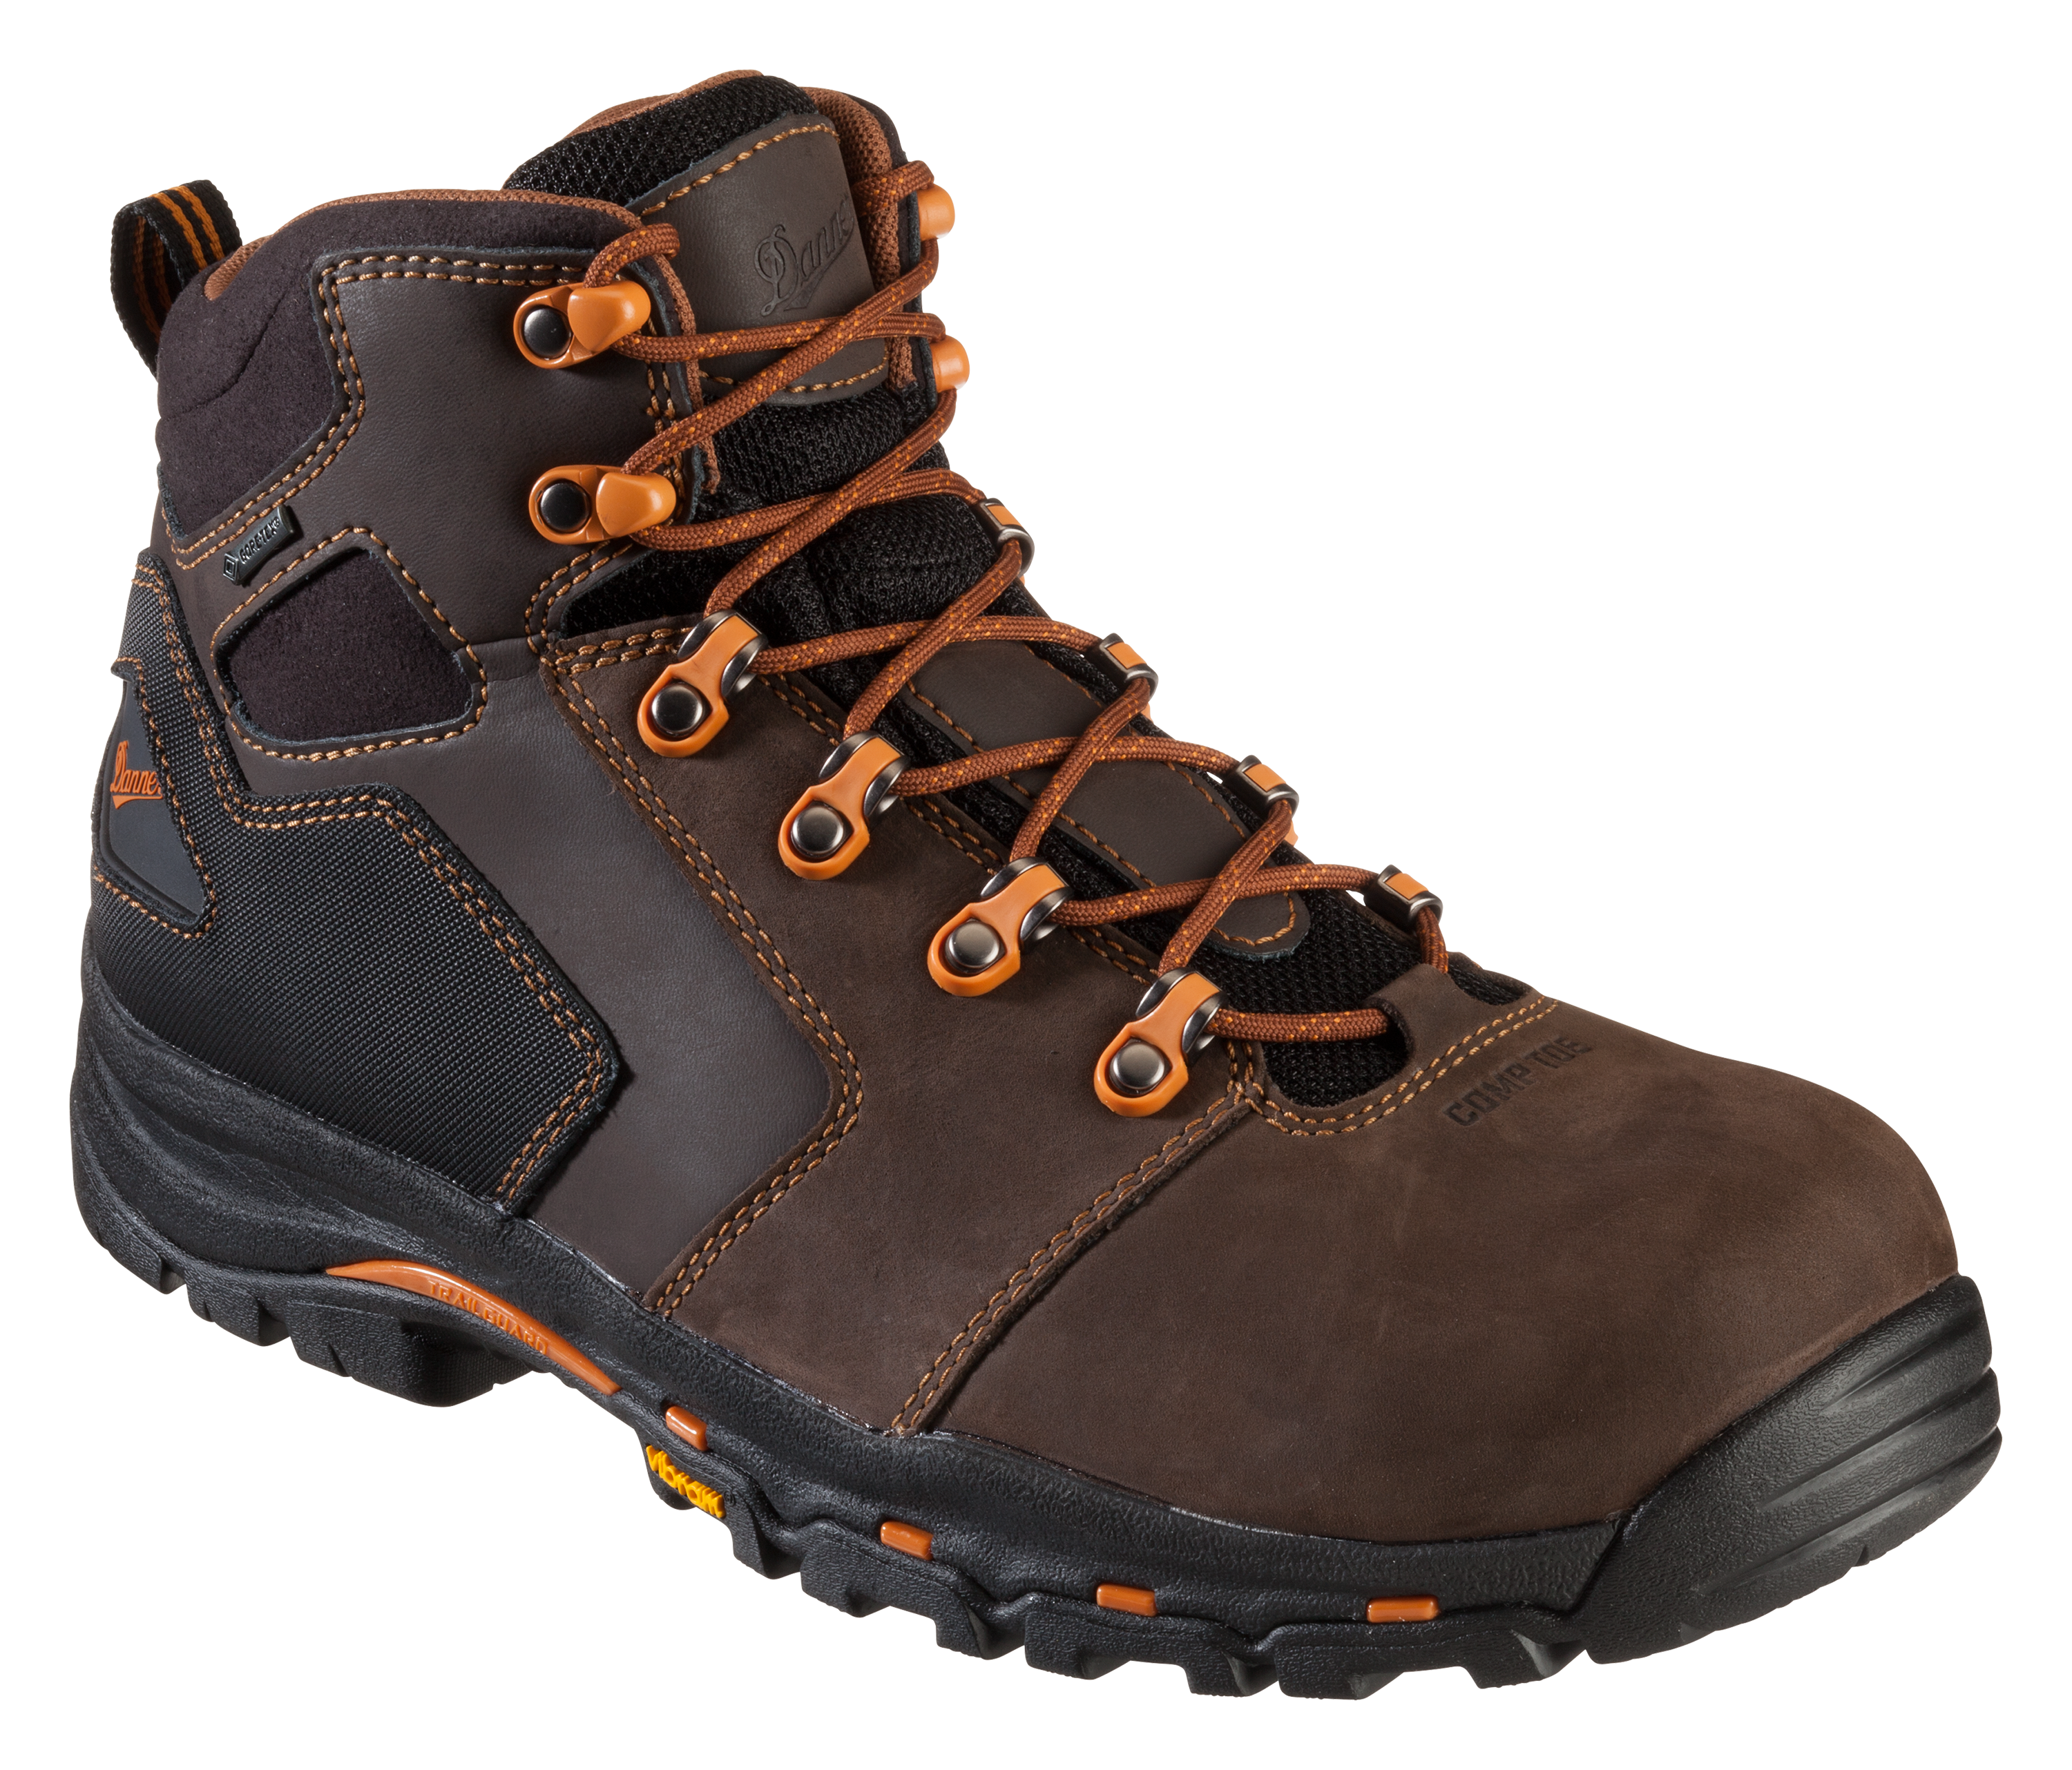 Danner Vicious GORE-TEX Non-Metallic Safety Toe Work Boots for Men - Brown - 9.5W